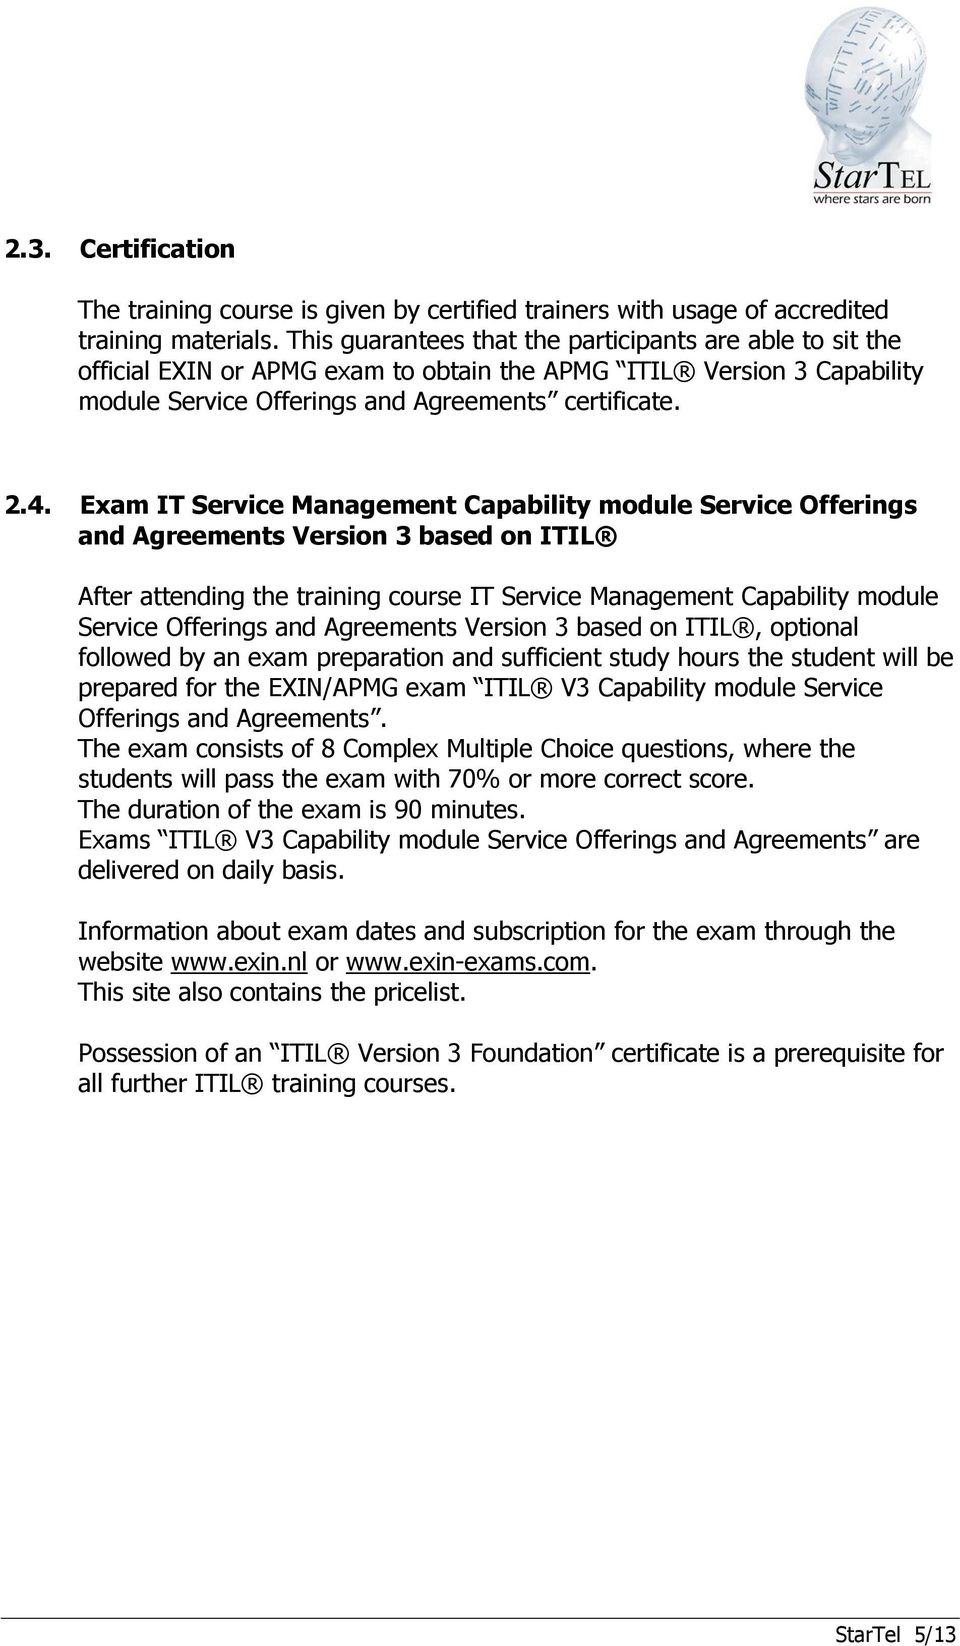 Exam IT Service Management Capability module Service Offerings and Agreements Version 3 based on ITIL After attending the training course IT Service Management Capability module Service Offerings and